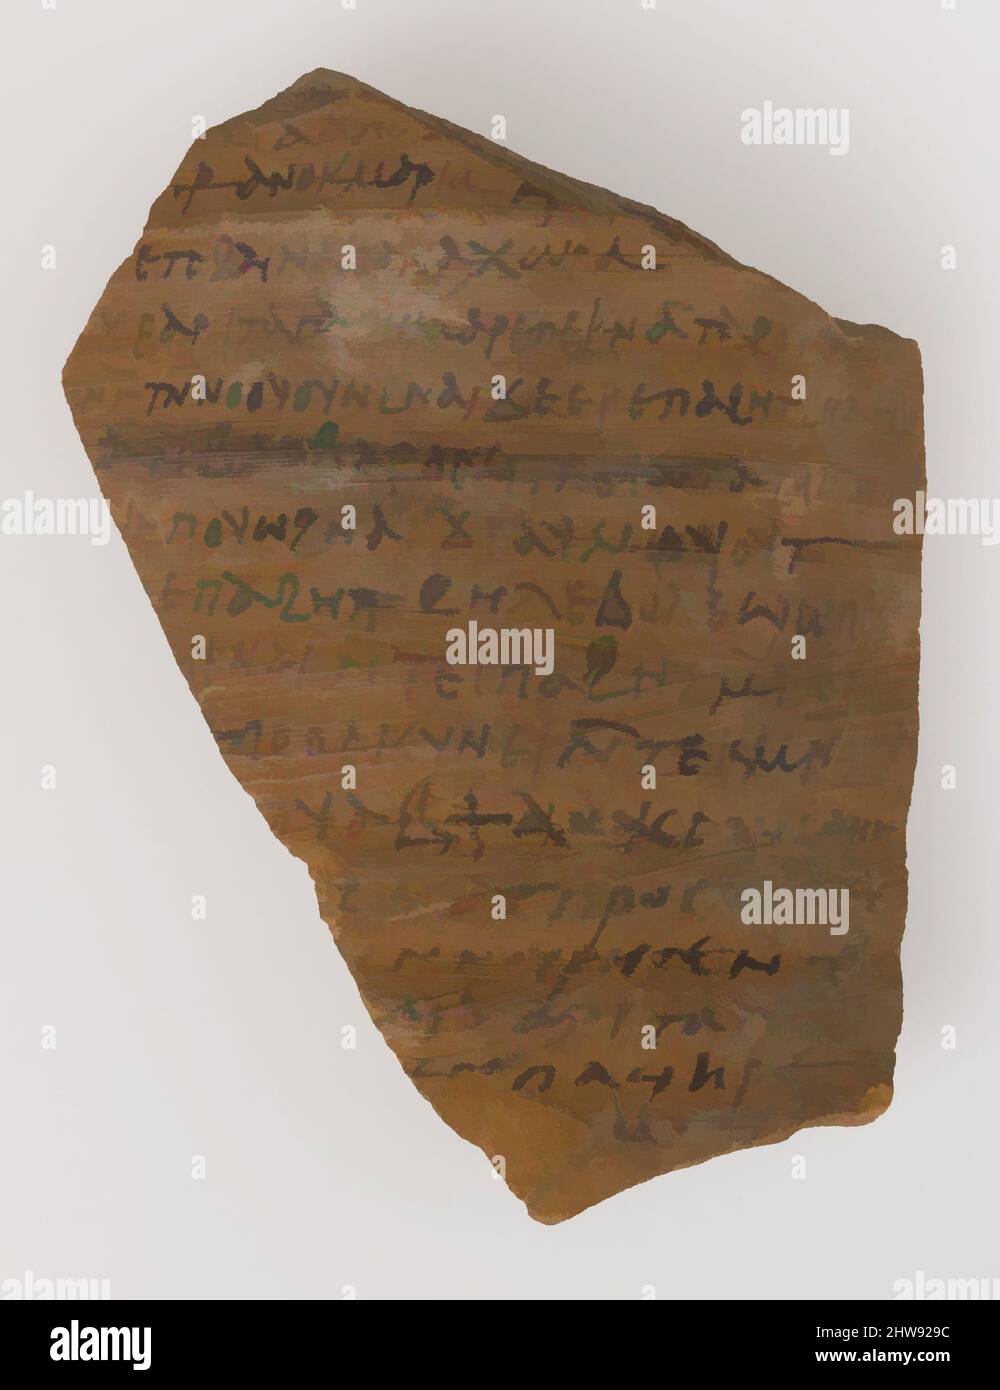 Art inspired by Ostrakon from Maria and Susanna Jointly to Panachora, probably early 7th century, Made in Byzantine Egypt, Coptic, Pottery fragment with ink inscription, 4 7/8 × 3 7/8 × 9/16 in. (12.4 × 9.9 × 1.5 cm), Ceramics, Ostraca are texts written on broken pottery, which were, Classic works modernized by Artotop with a splash of modernity. Shapes, color and value, eye-catching visual impact on art. Emotions through freedom of artworks in a contemporary way. A timeless message pursuing a wildly creative new direction. Artists turning to the digital medium and creating the Artotop NFT Stock Photo